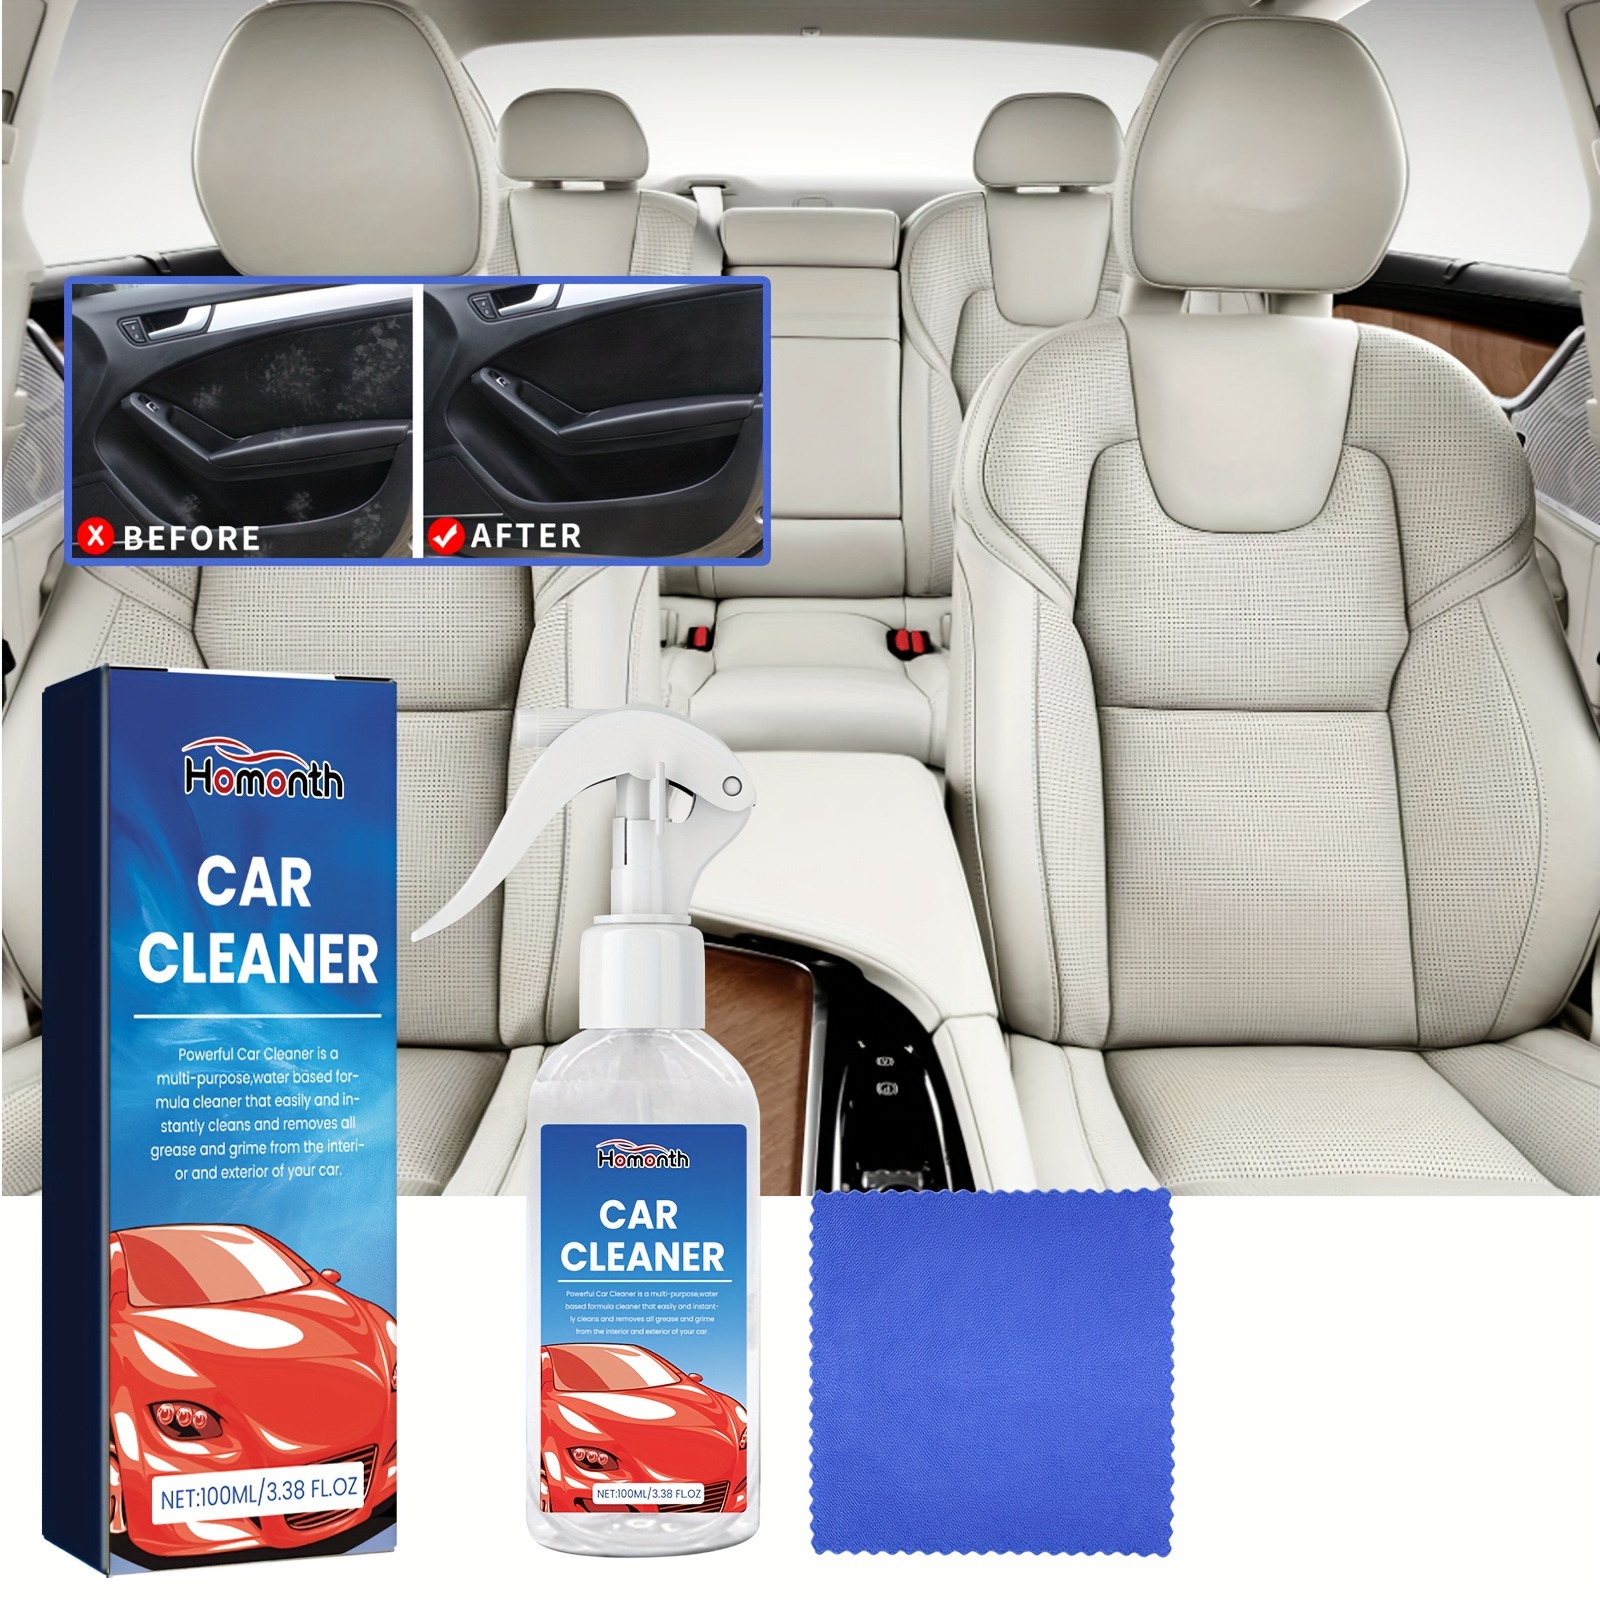 Car Exterior & Interior Cleaning with Foam Wash & Polishing. at